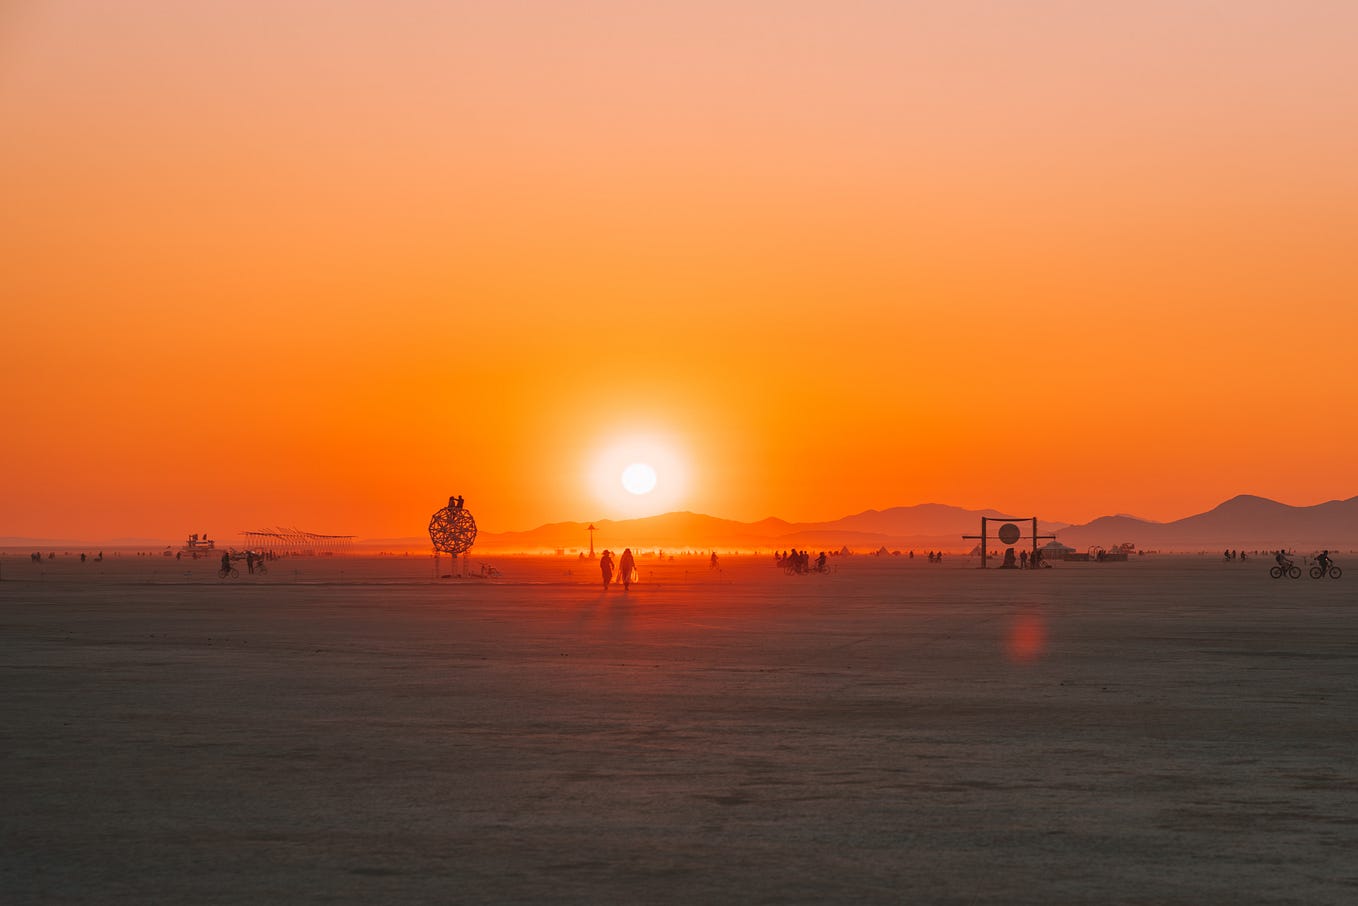 How Burning Man’s Principles Can Reinvent Corporate America